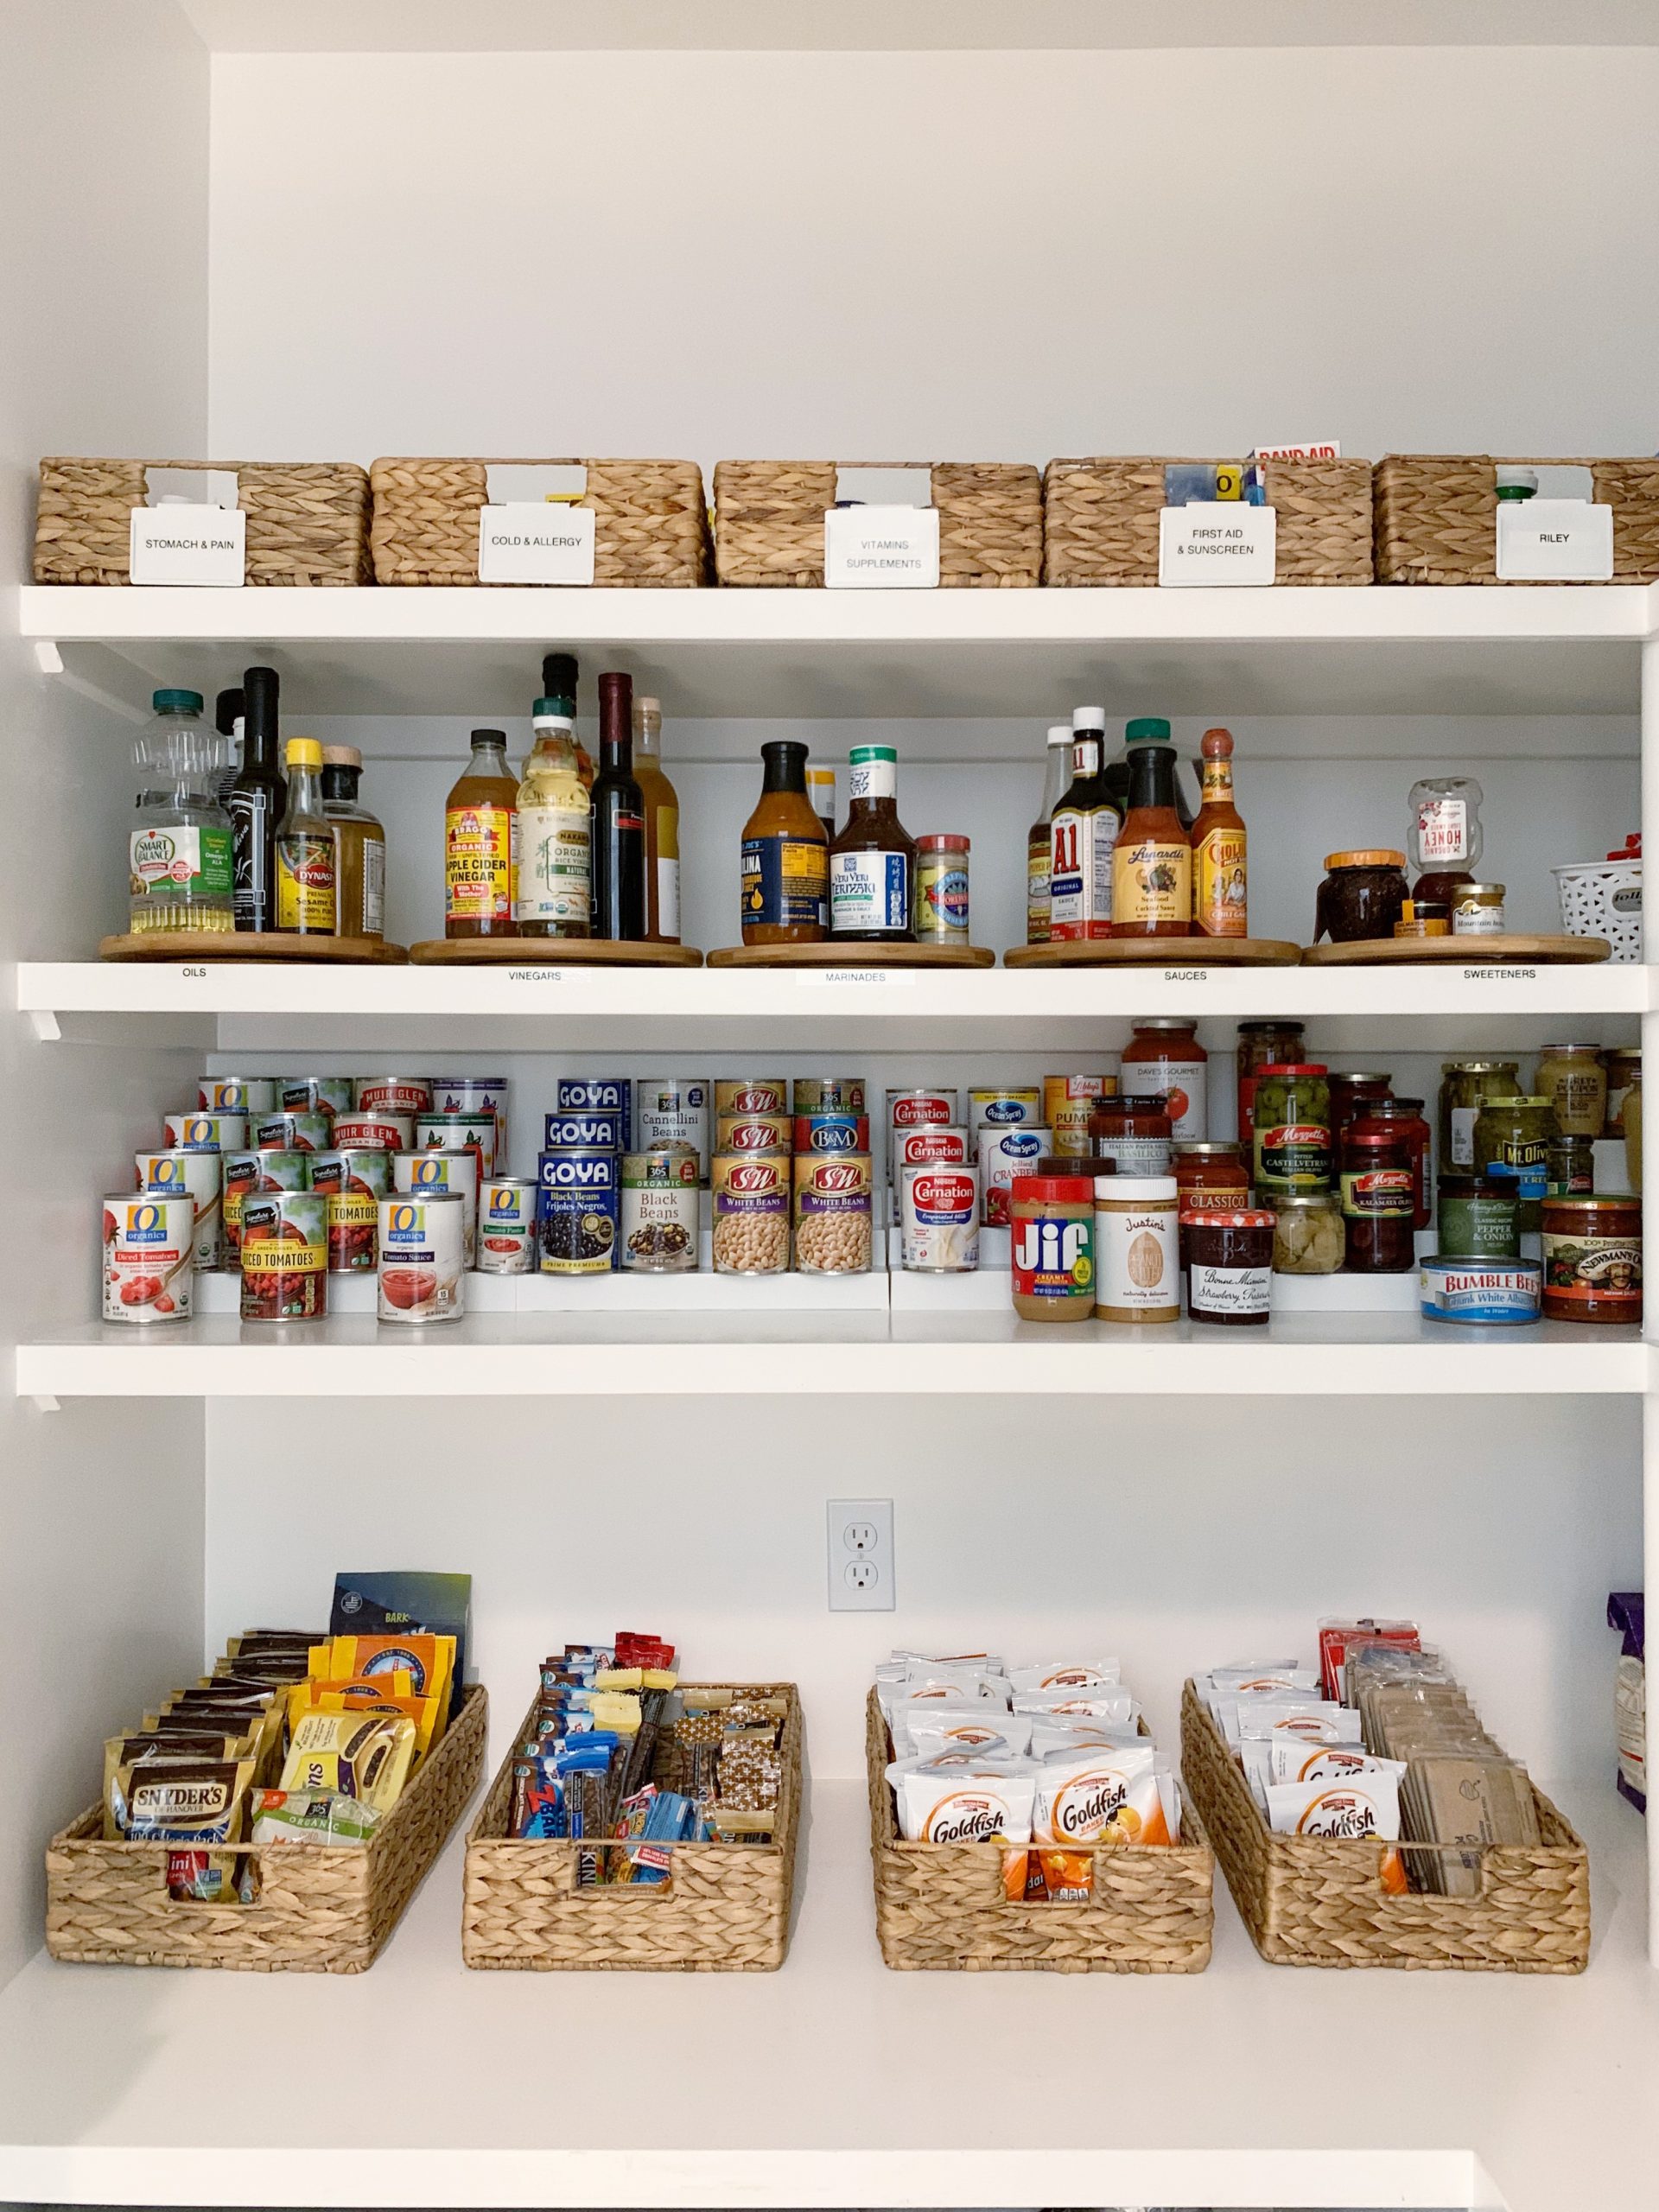 My Simplified and Organized Walk-In Pantry - A Poised Perspective